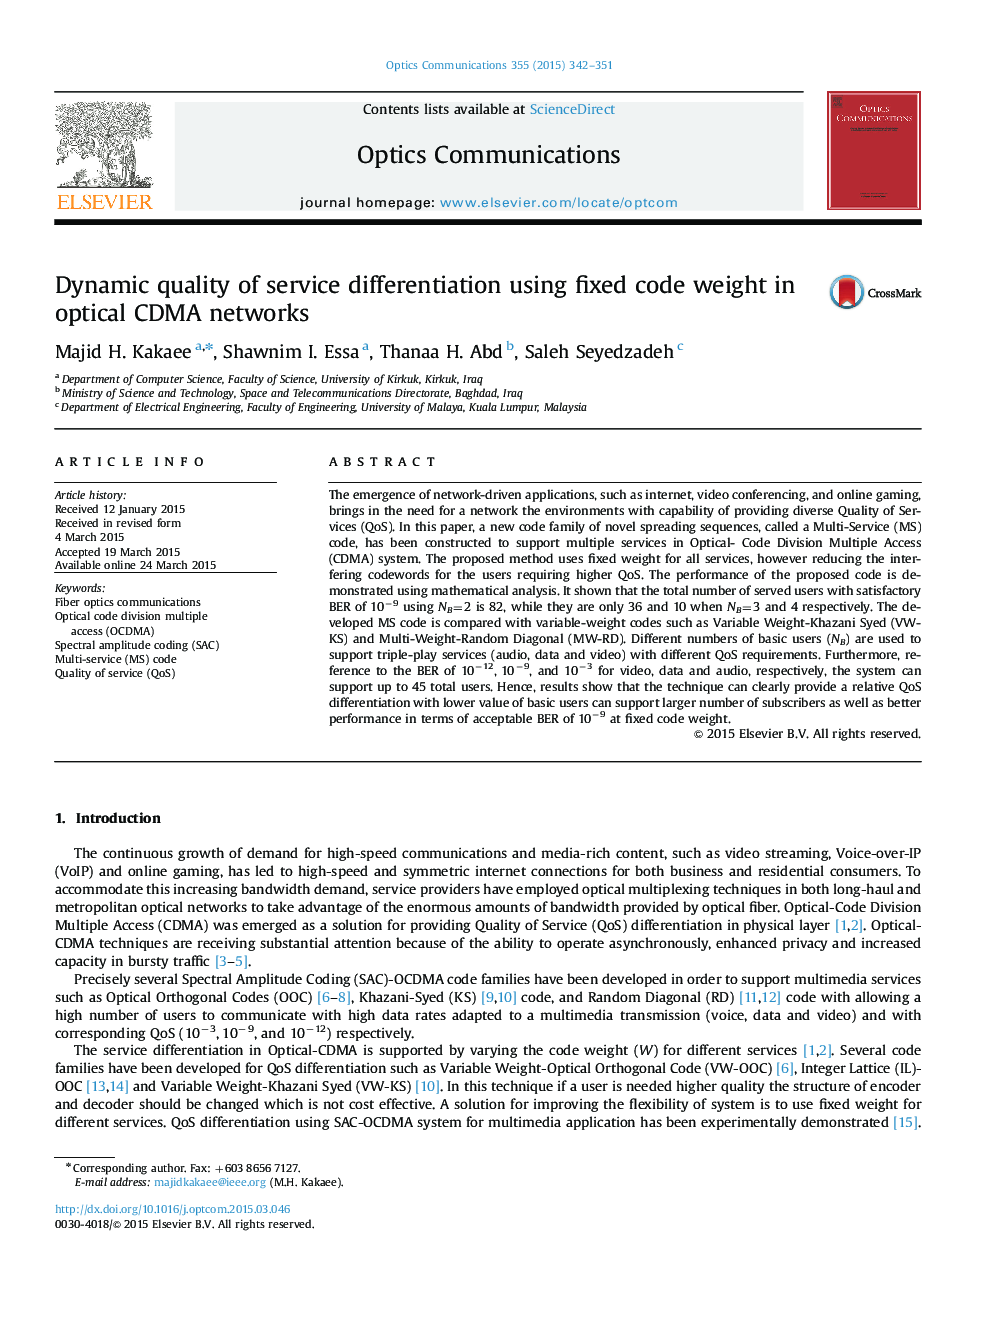 Dynamic quality of service differentiation using fixed code weight in optical CDMA networks